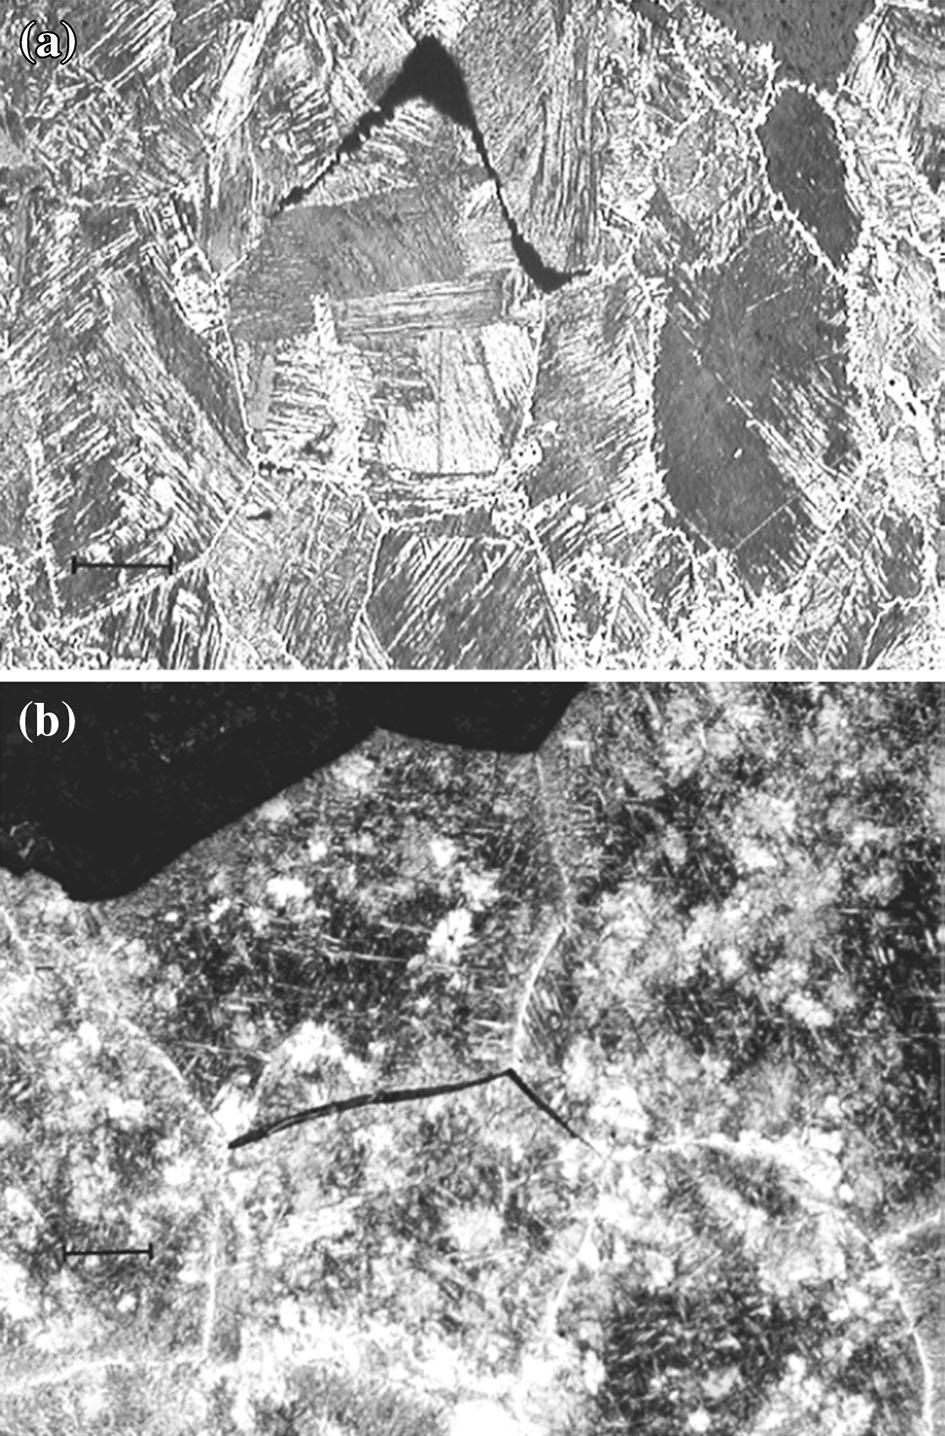 Fig. 4 (a) Steel C3: Optical micrograph reveals cracking, ostensibly within ferrite that formed on prior austenite grain boundaries. The specimen was solution treated and tested at 1073 K (800 C).